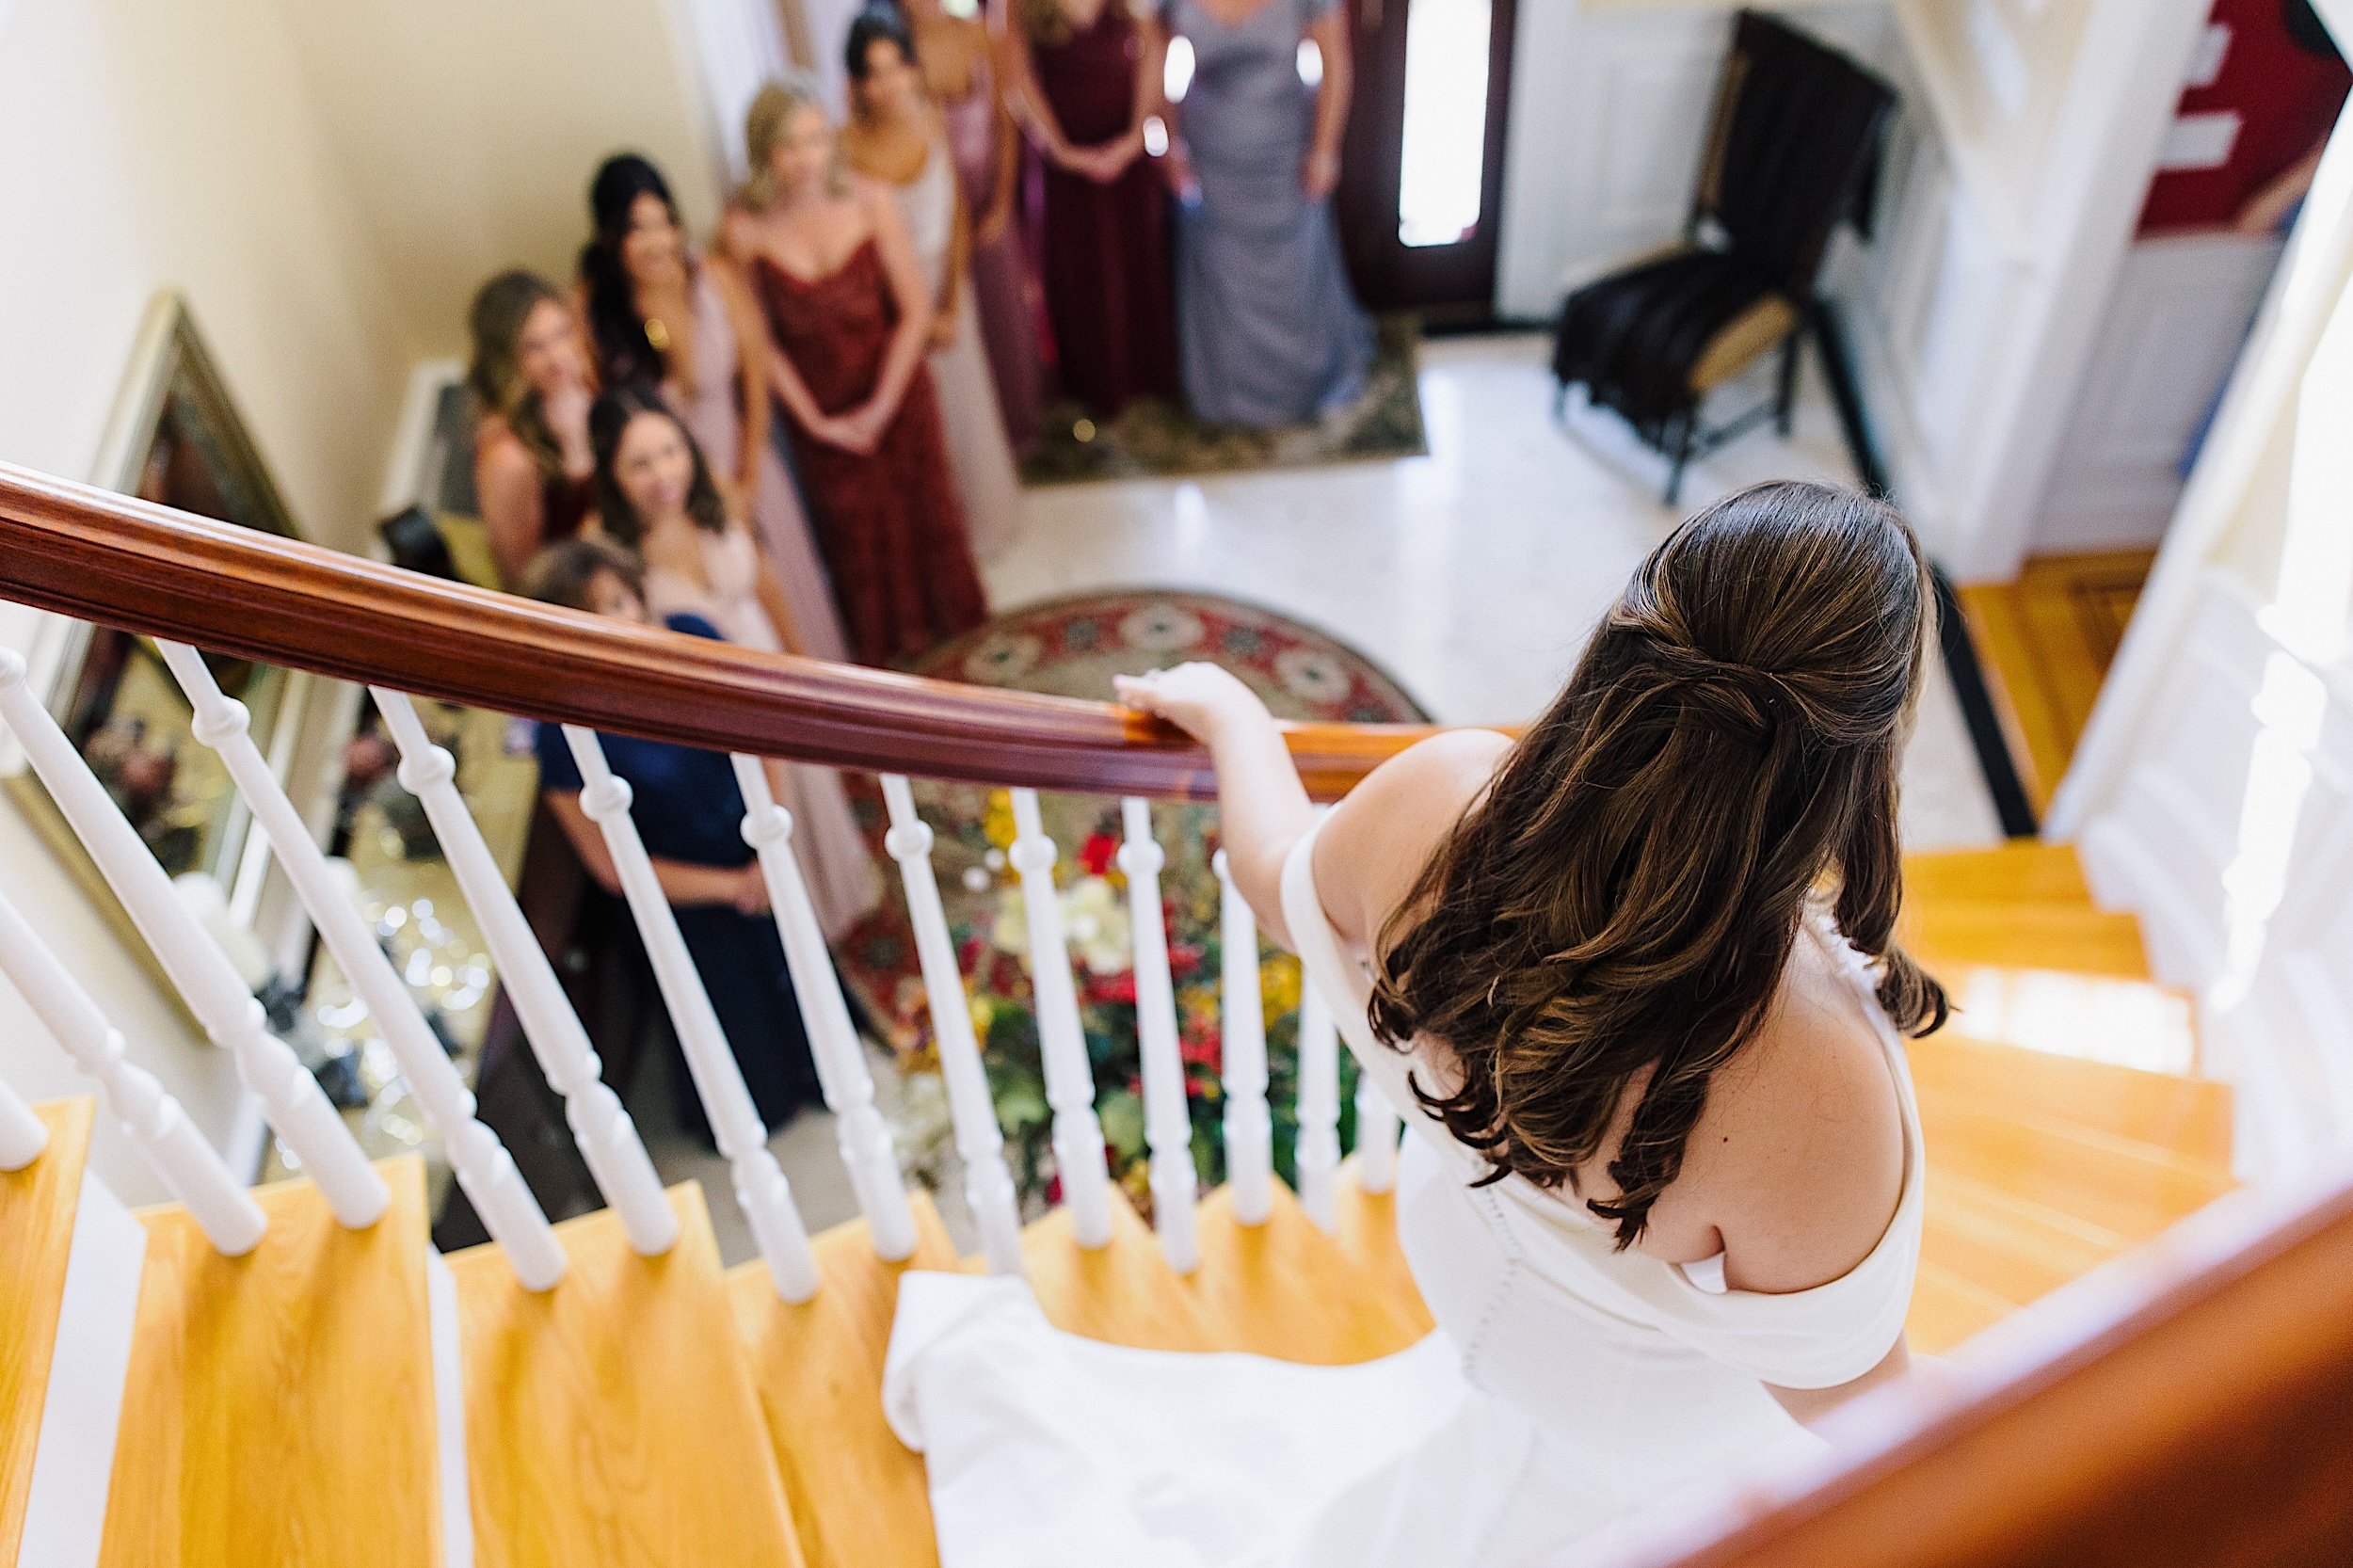 070-ZacWolfPhotography-20220910-Blog_bride-coming-down-stairs.jpg